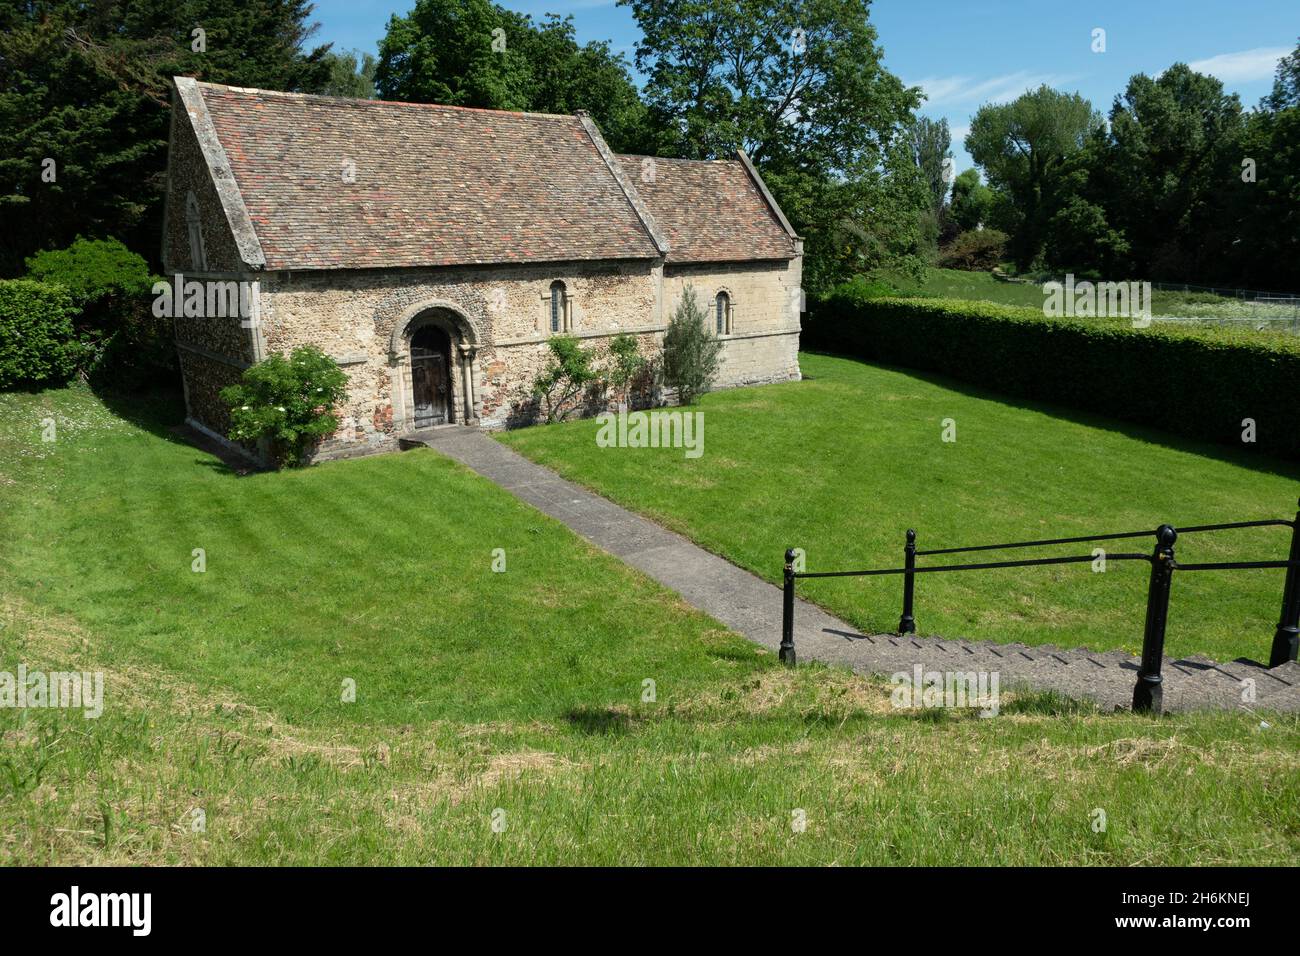 View of the Cambridge Leper Chapel. The chapel acted as a leper hospital in the Middle Ages and is one of the oldest buildings in Cambridge England Stock Photo